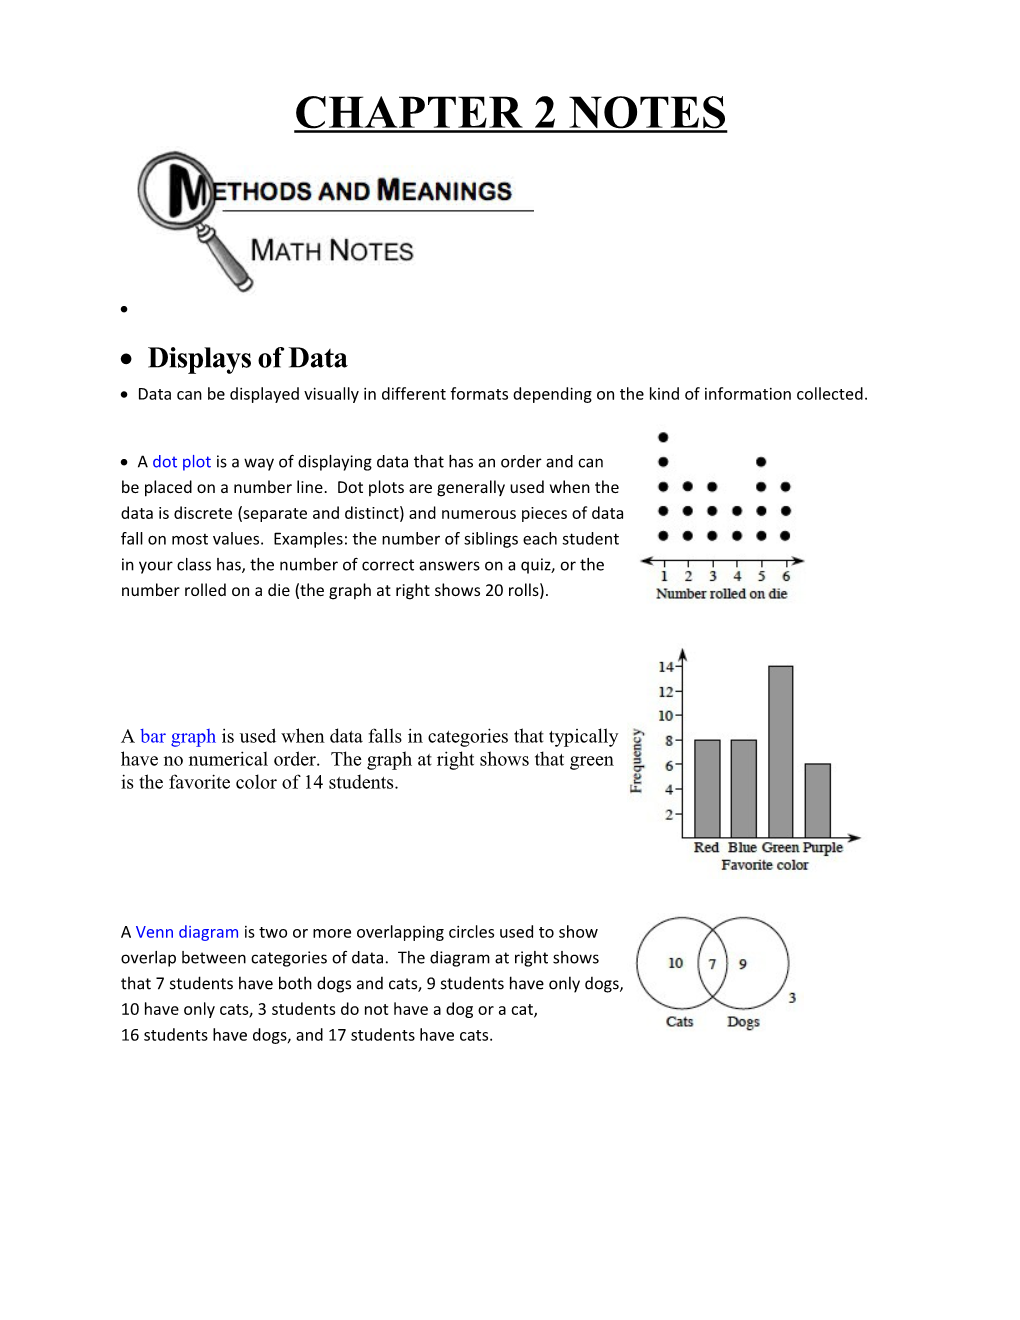 Data Can Be Displayed Visually in Different Formats Depending on the Kind of Information